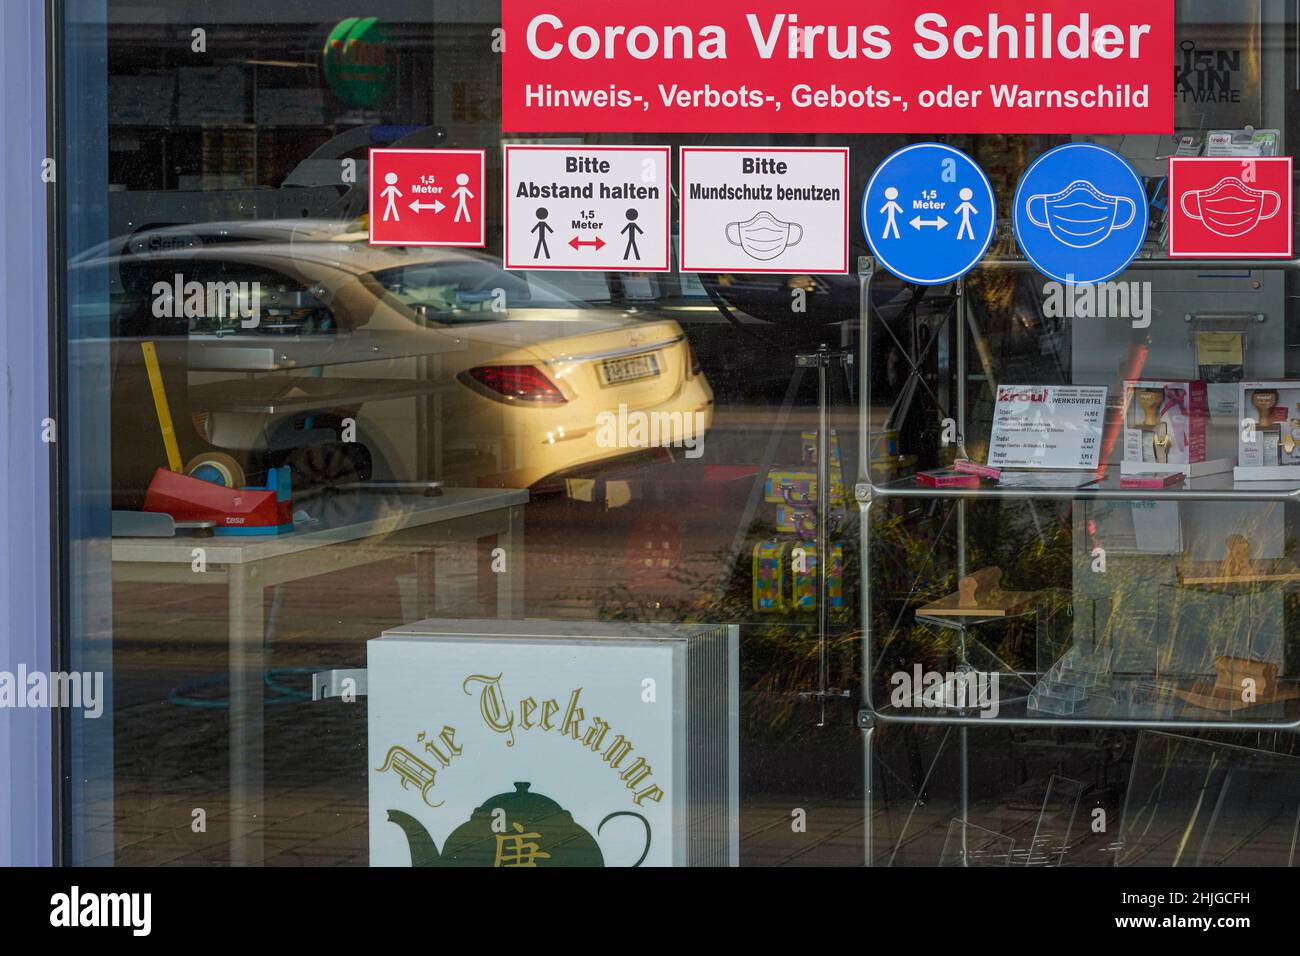 On the window of a store Corona Virus signs are offered for sale: Instruction signs, prohibition signs, mandatory signs or warning signs. Stock Photo